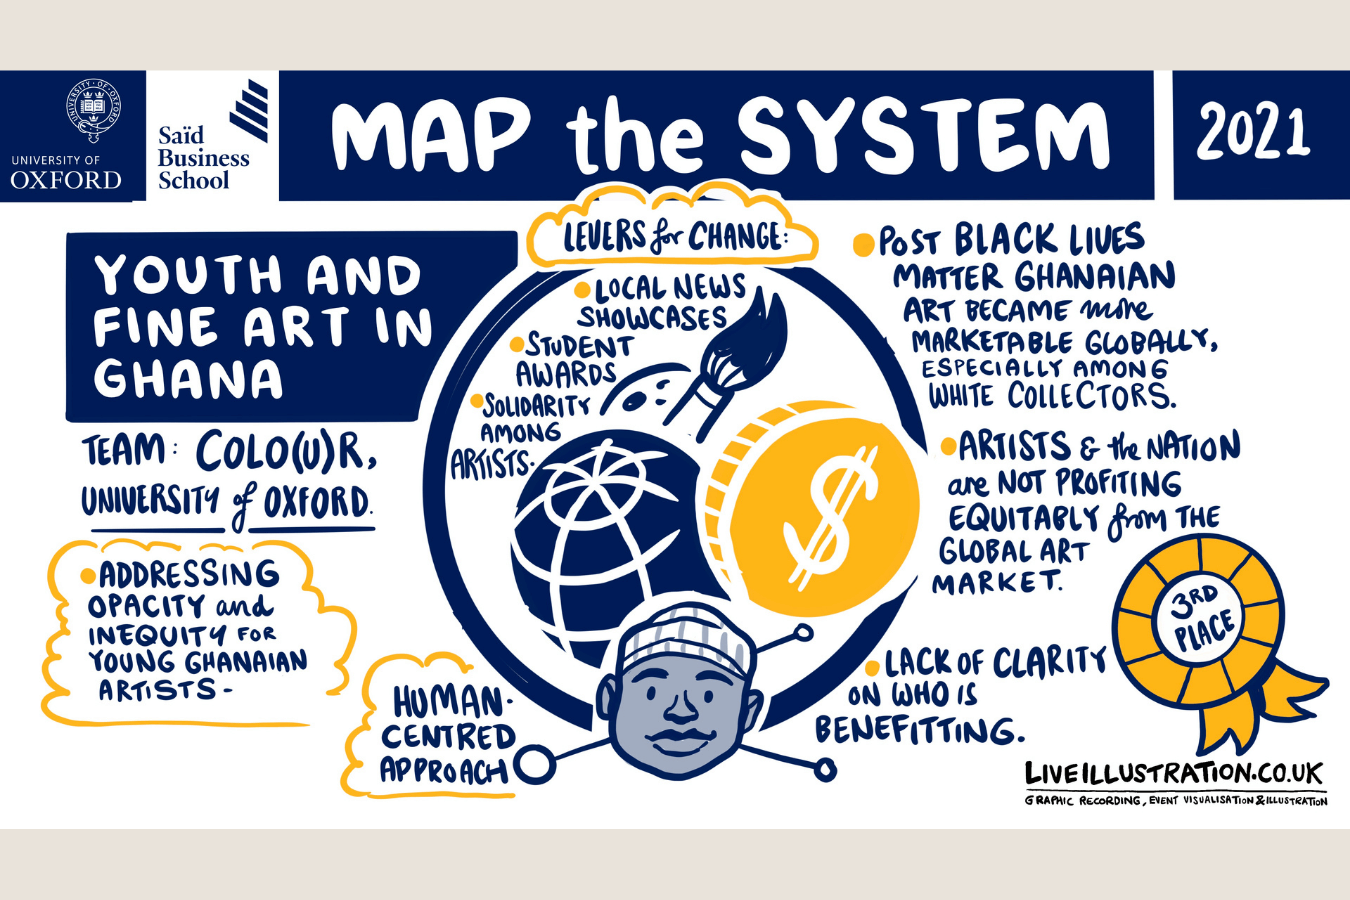 Map the System 2021 finalist's Live Scribed Illustrations from University of Oxford